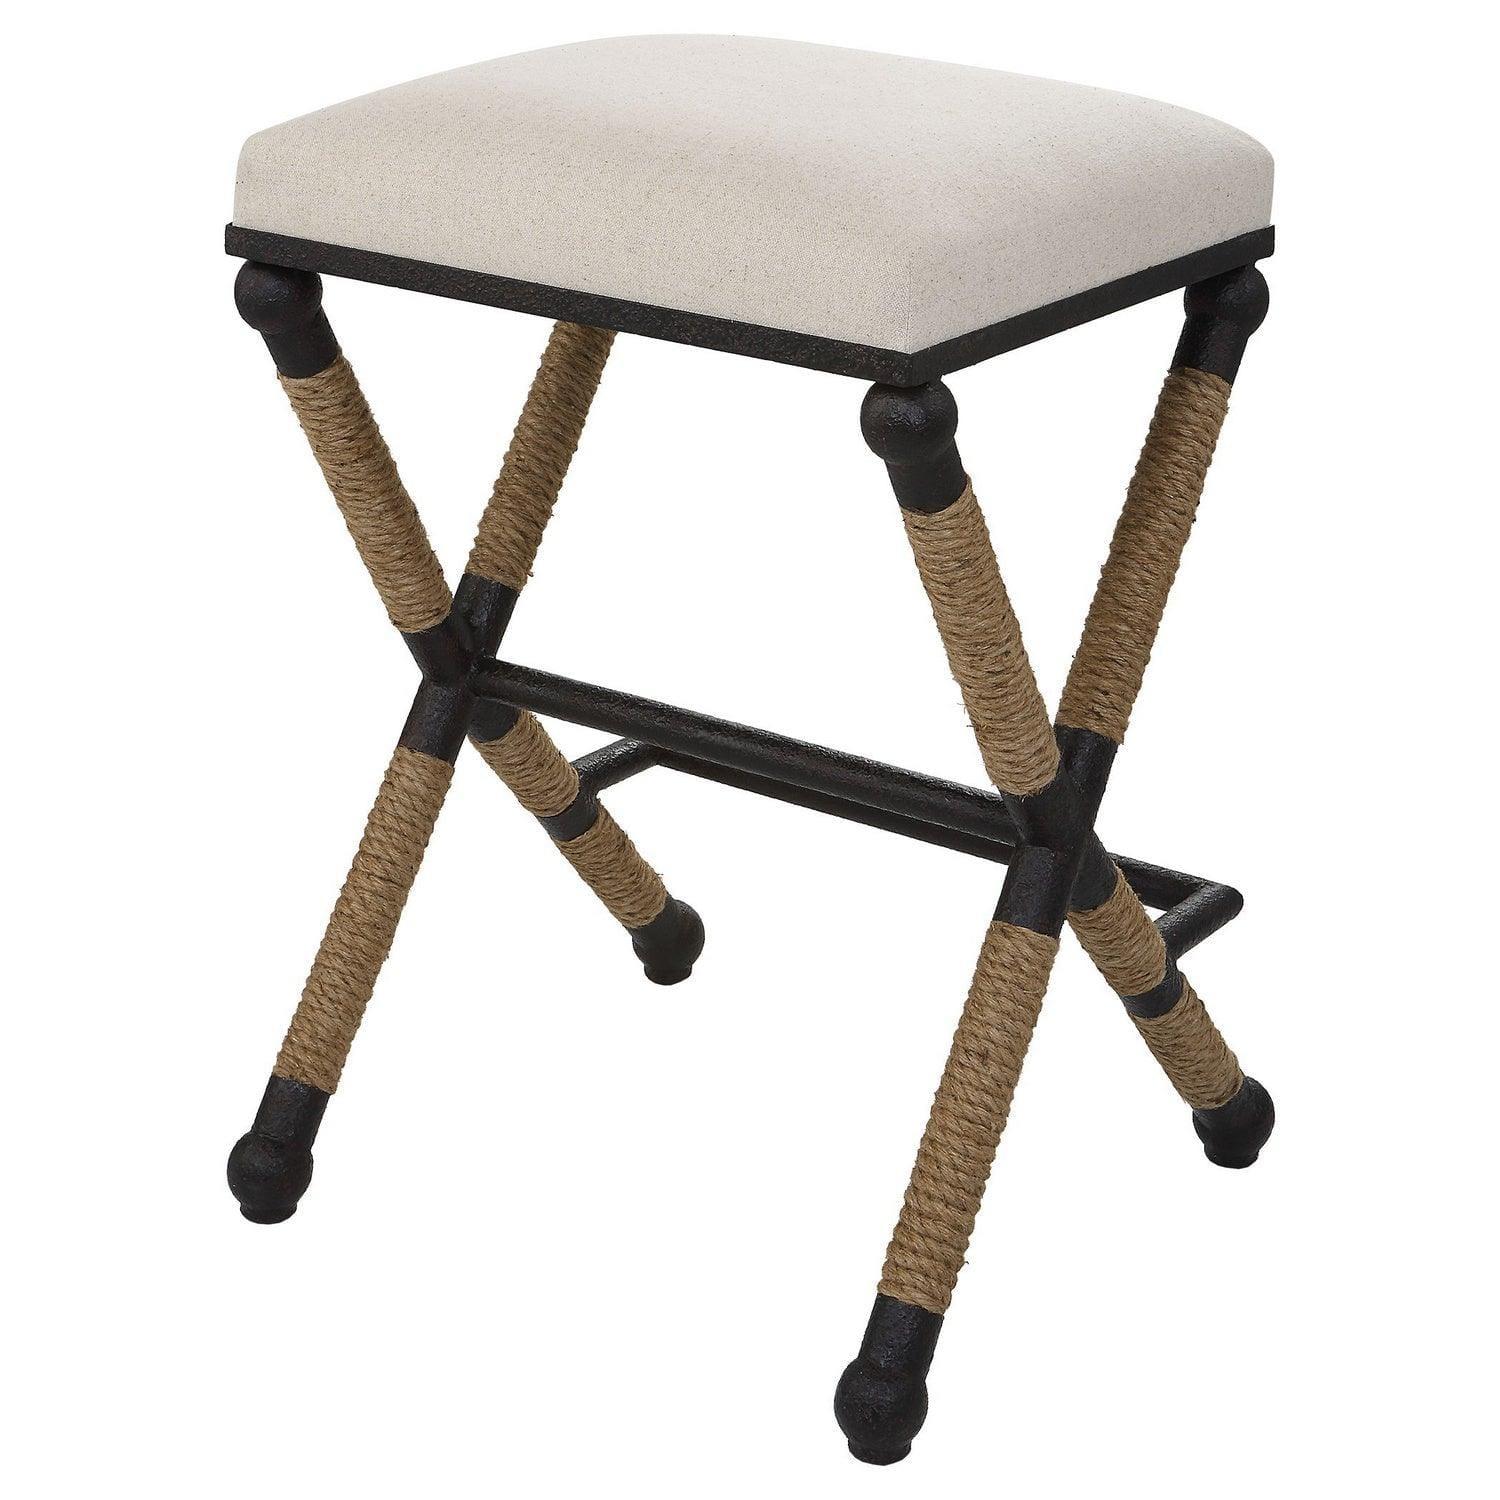 The Uttermost - Firth Rustic Counter Stool - 23709 | Montreal Lighting & Hardware